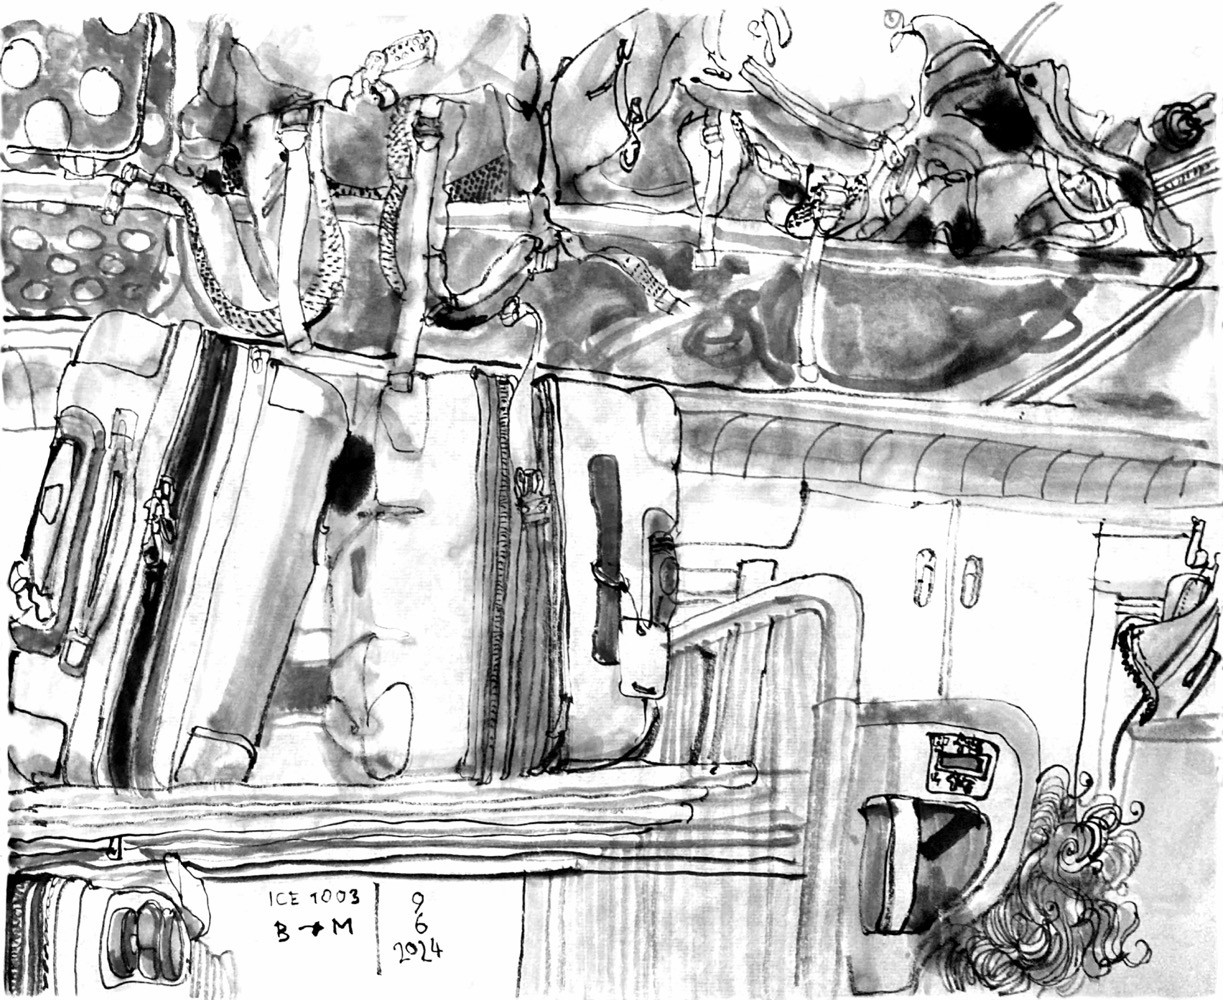 Ink drawing of a luggage rack in a train, loaded with backpacks and suitcases.